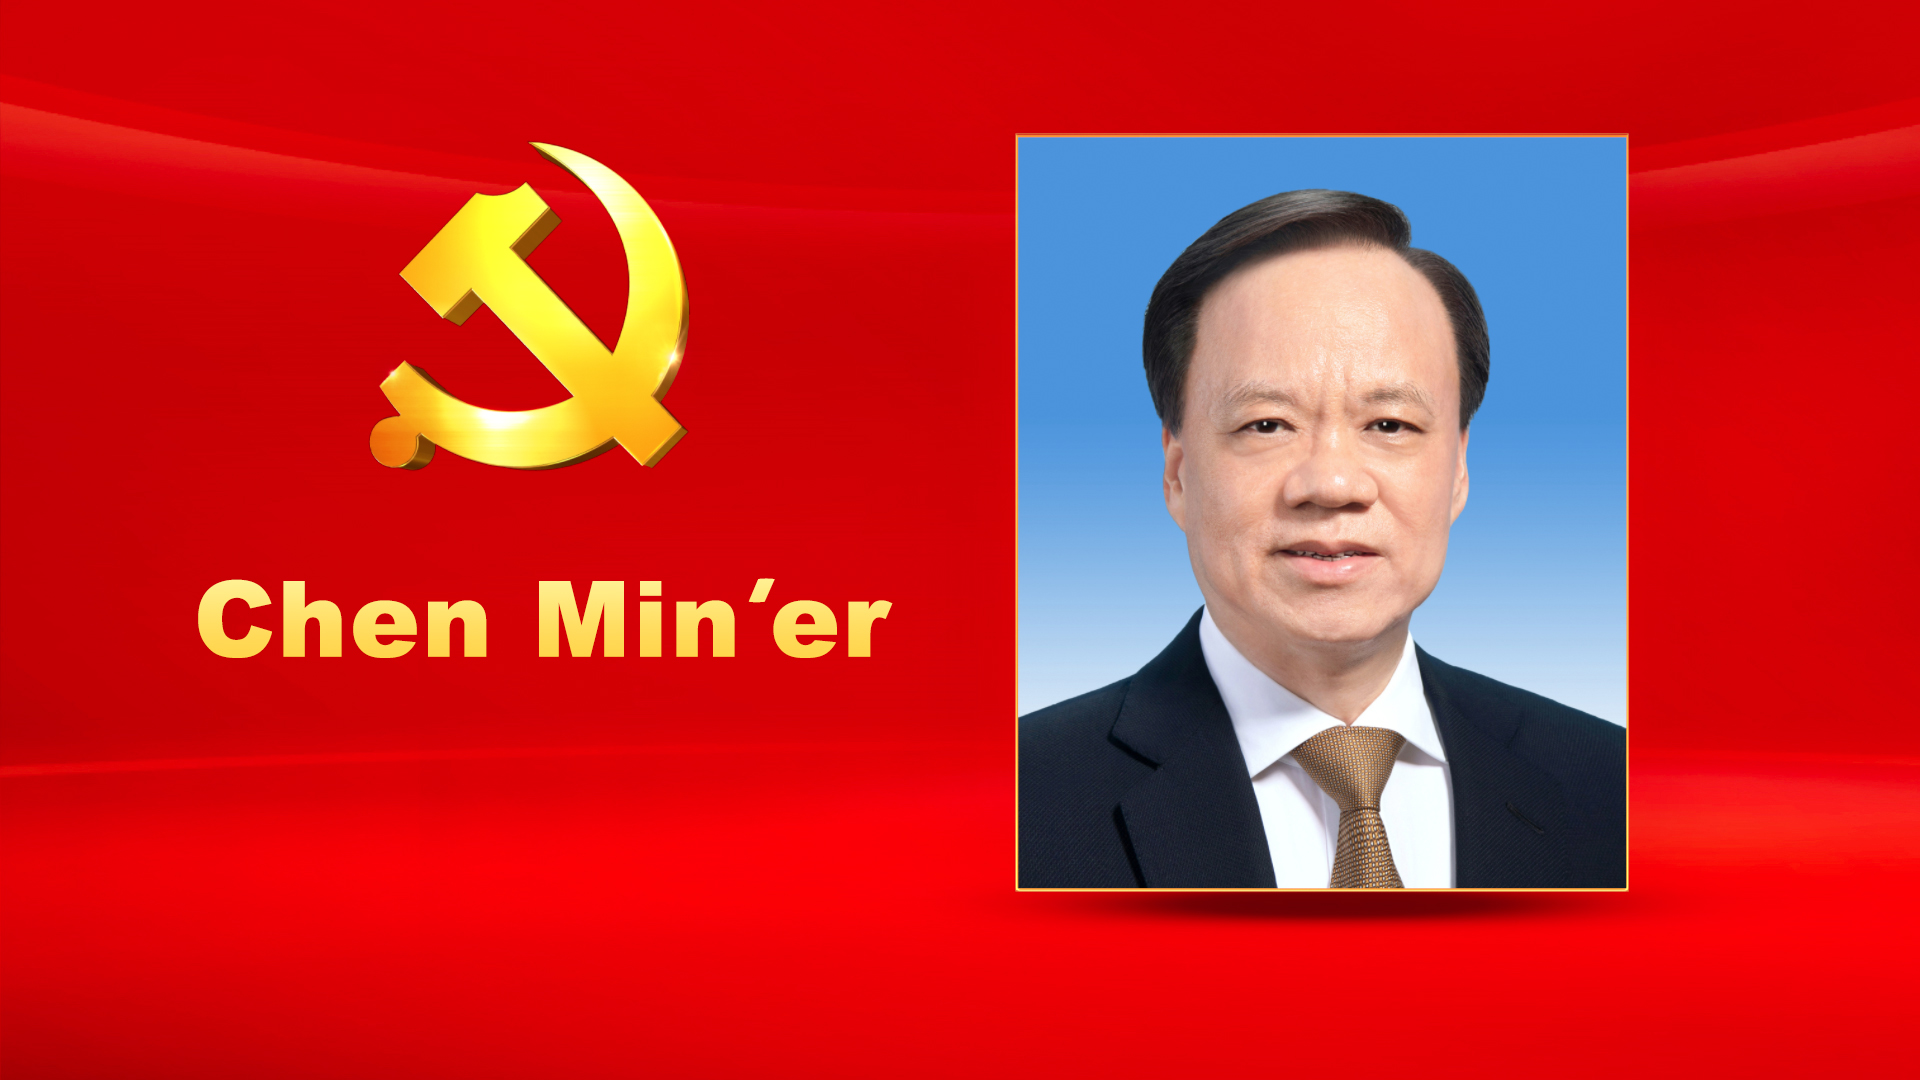 Chen Min'er, male, Han ethnicity, was born in September 1960 and is from Zhuji, Zhejiang Province. He began his first job in August 1981 and joined the Communist Party of China (CPC) in September 1982. He received a graduate education at the Central Party School. Chen is currently a member of the CPC Central Committee Political Bureau and Secretary of the CPC Chongqing Municipal Committee.